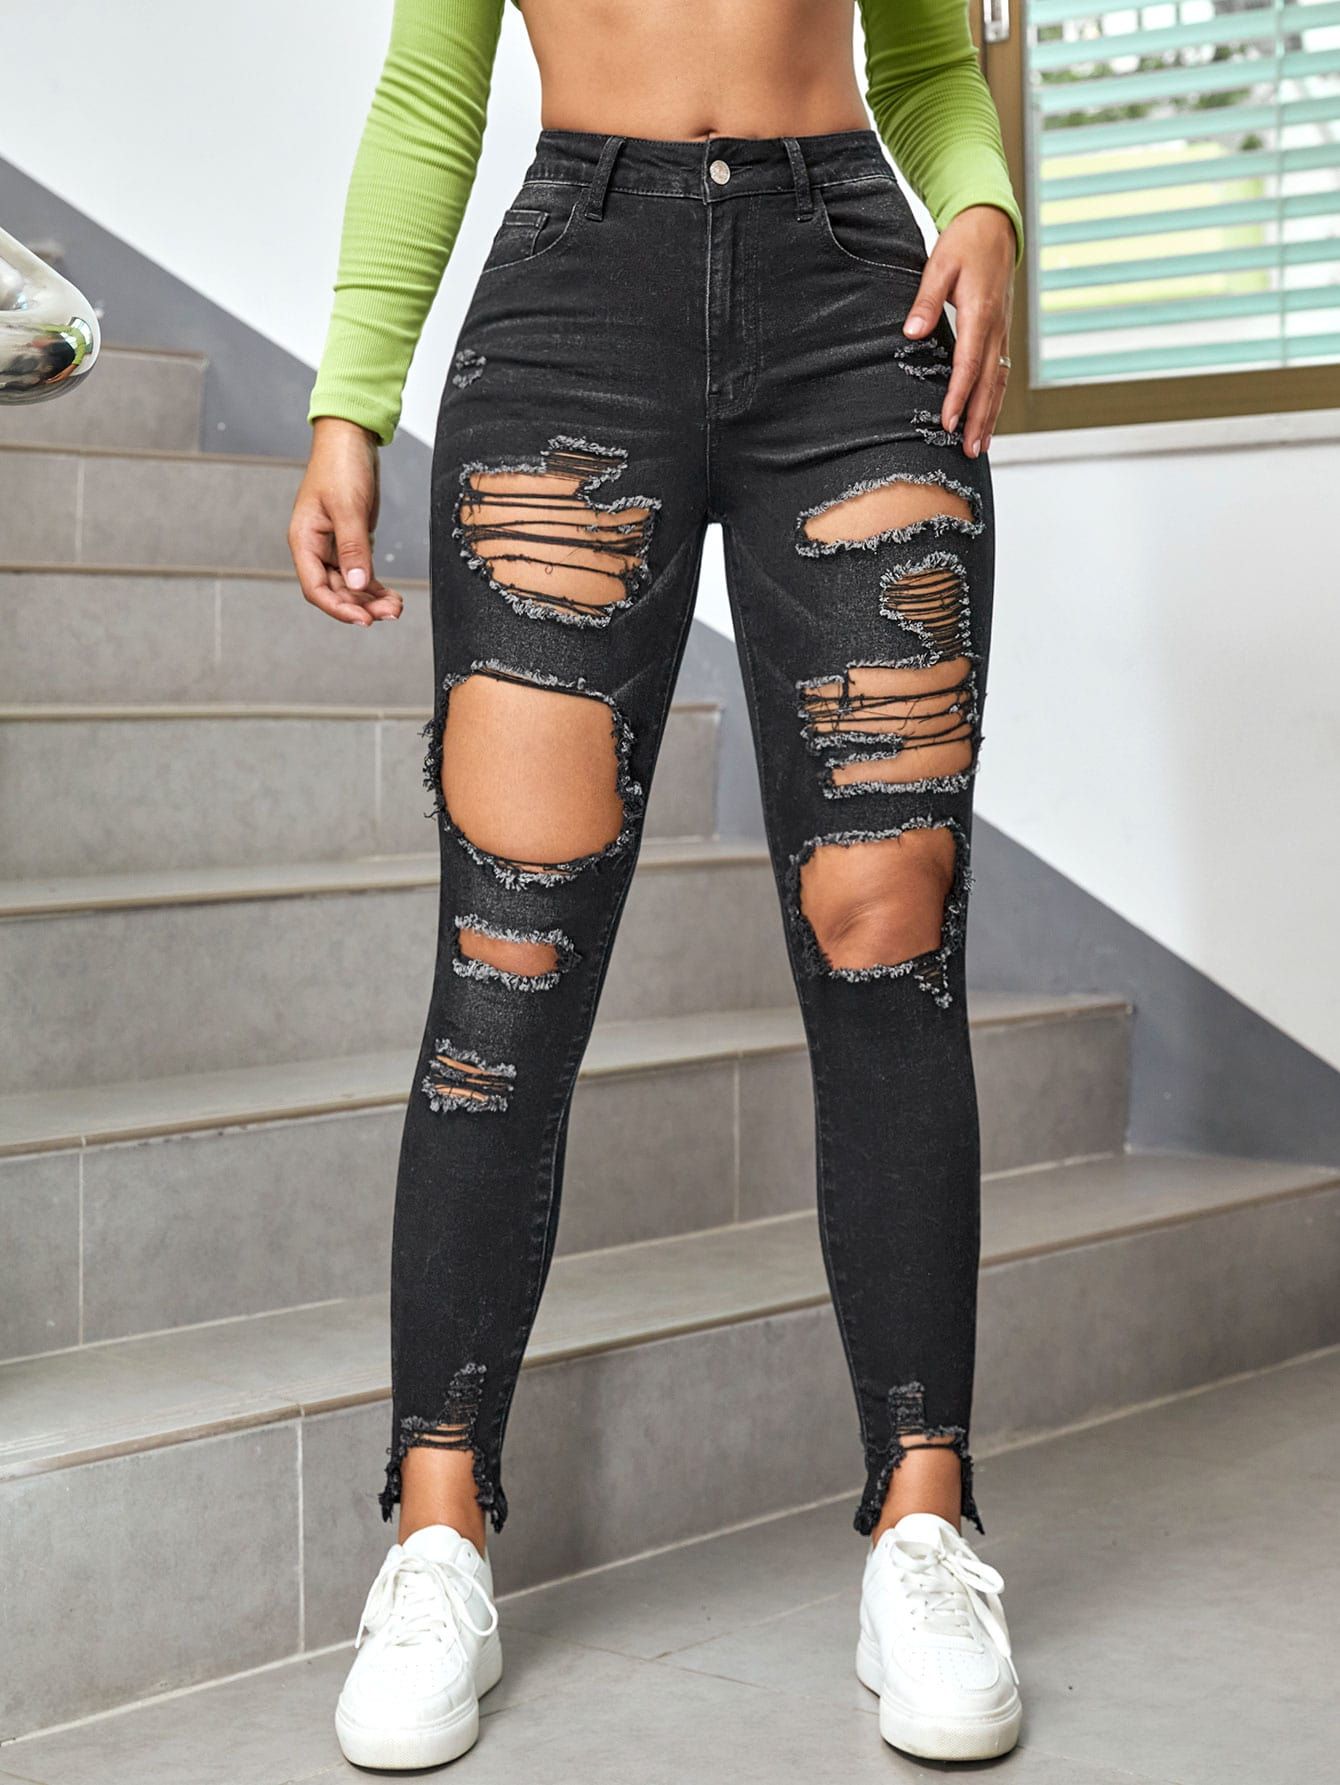 How to Style Ripped Skinny Jeans: 13 Stylish & Lean Outfit Ideas for Ladies